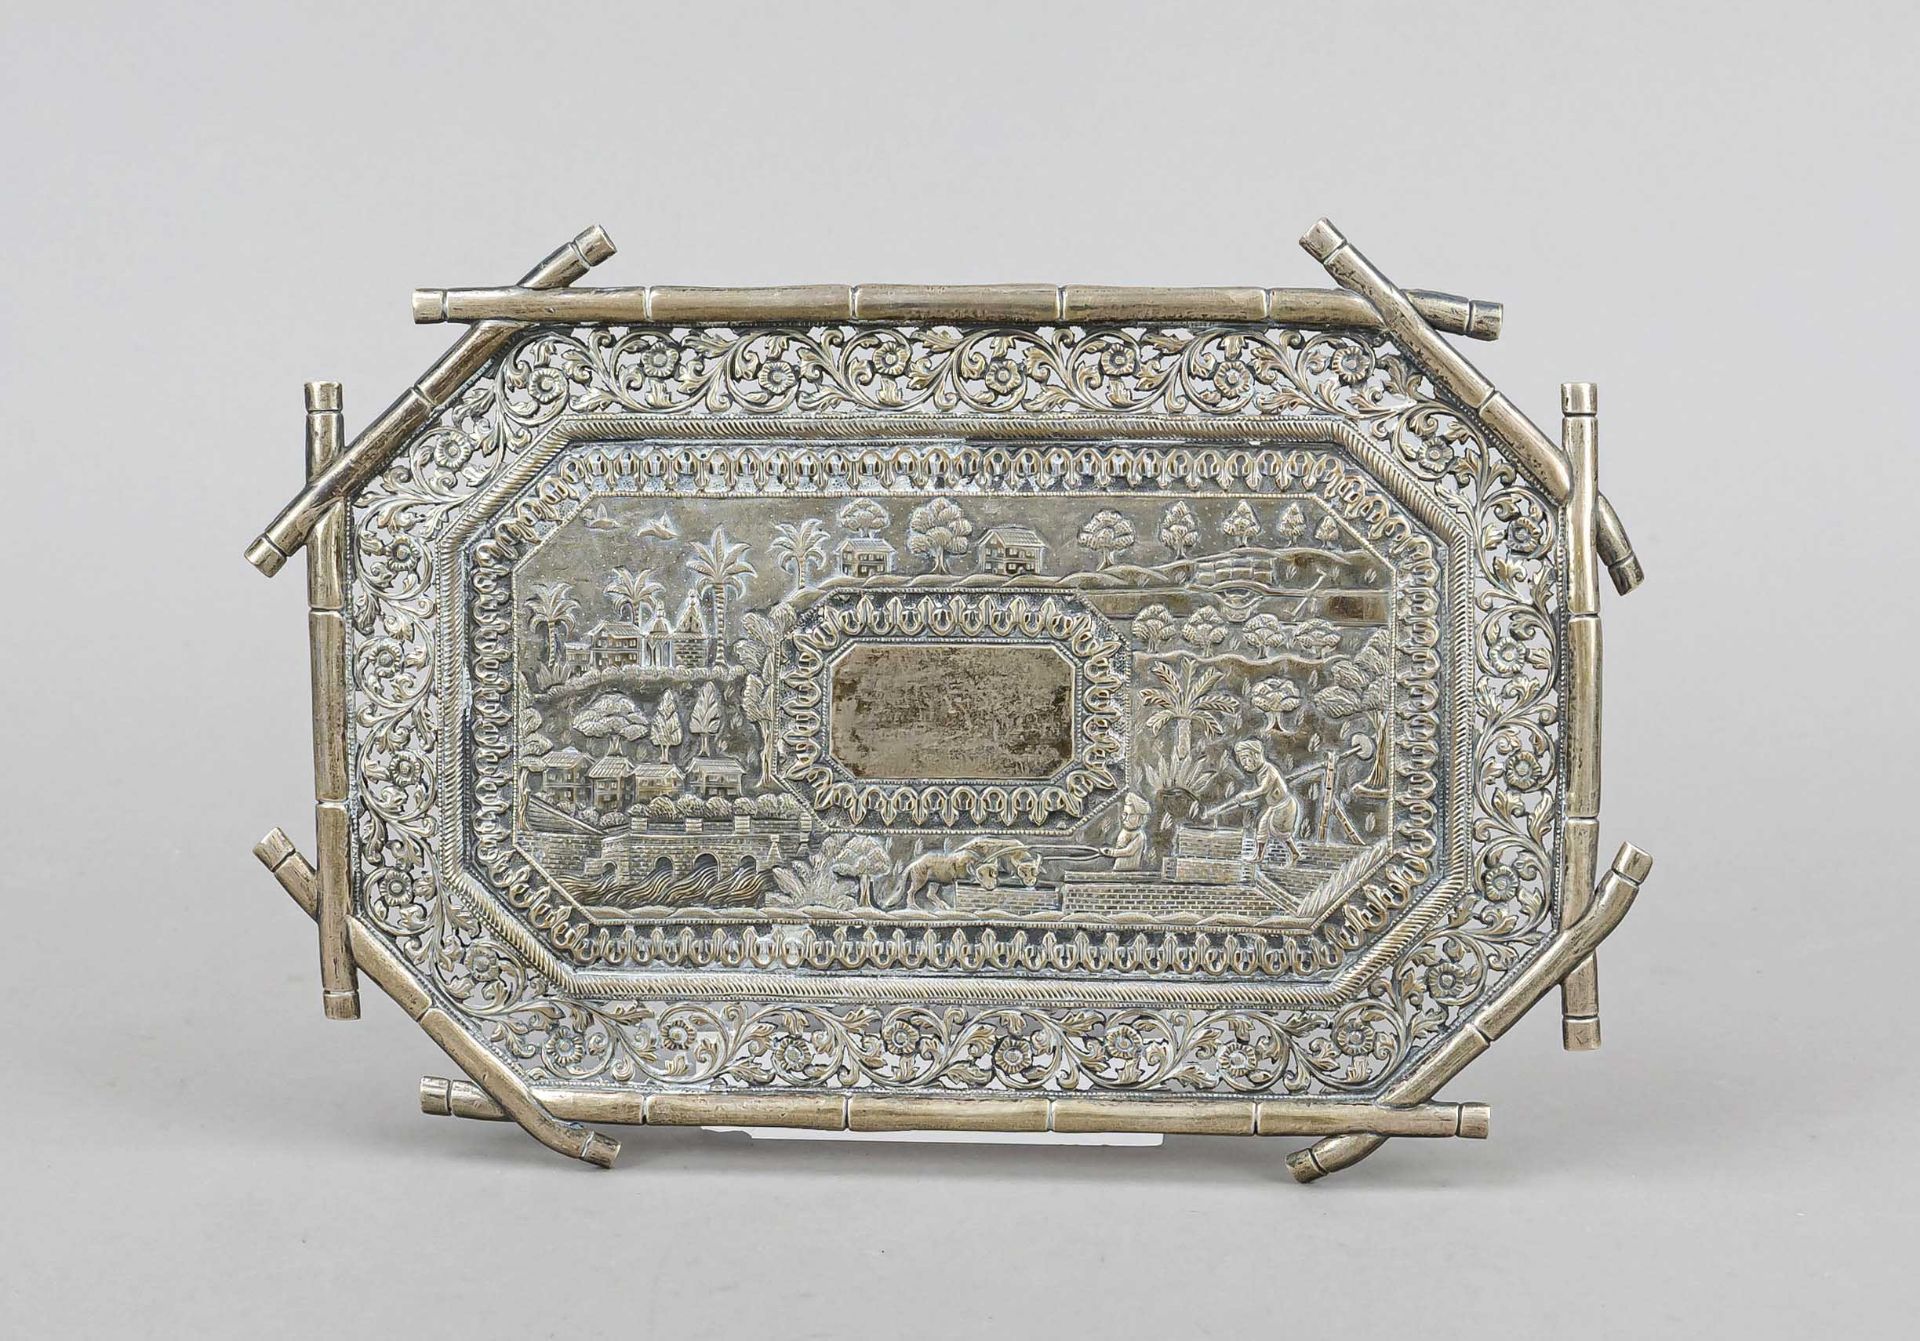 Tray, East Asia (?), 20th century, silver tested, on 4 ball feet, rectangular form with flattened